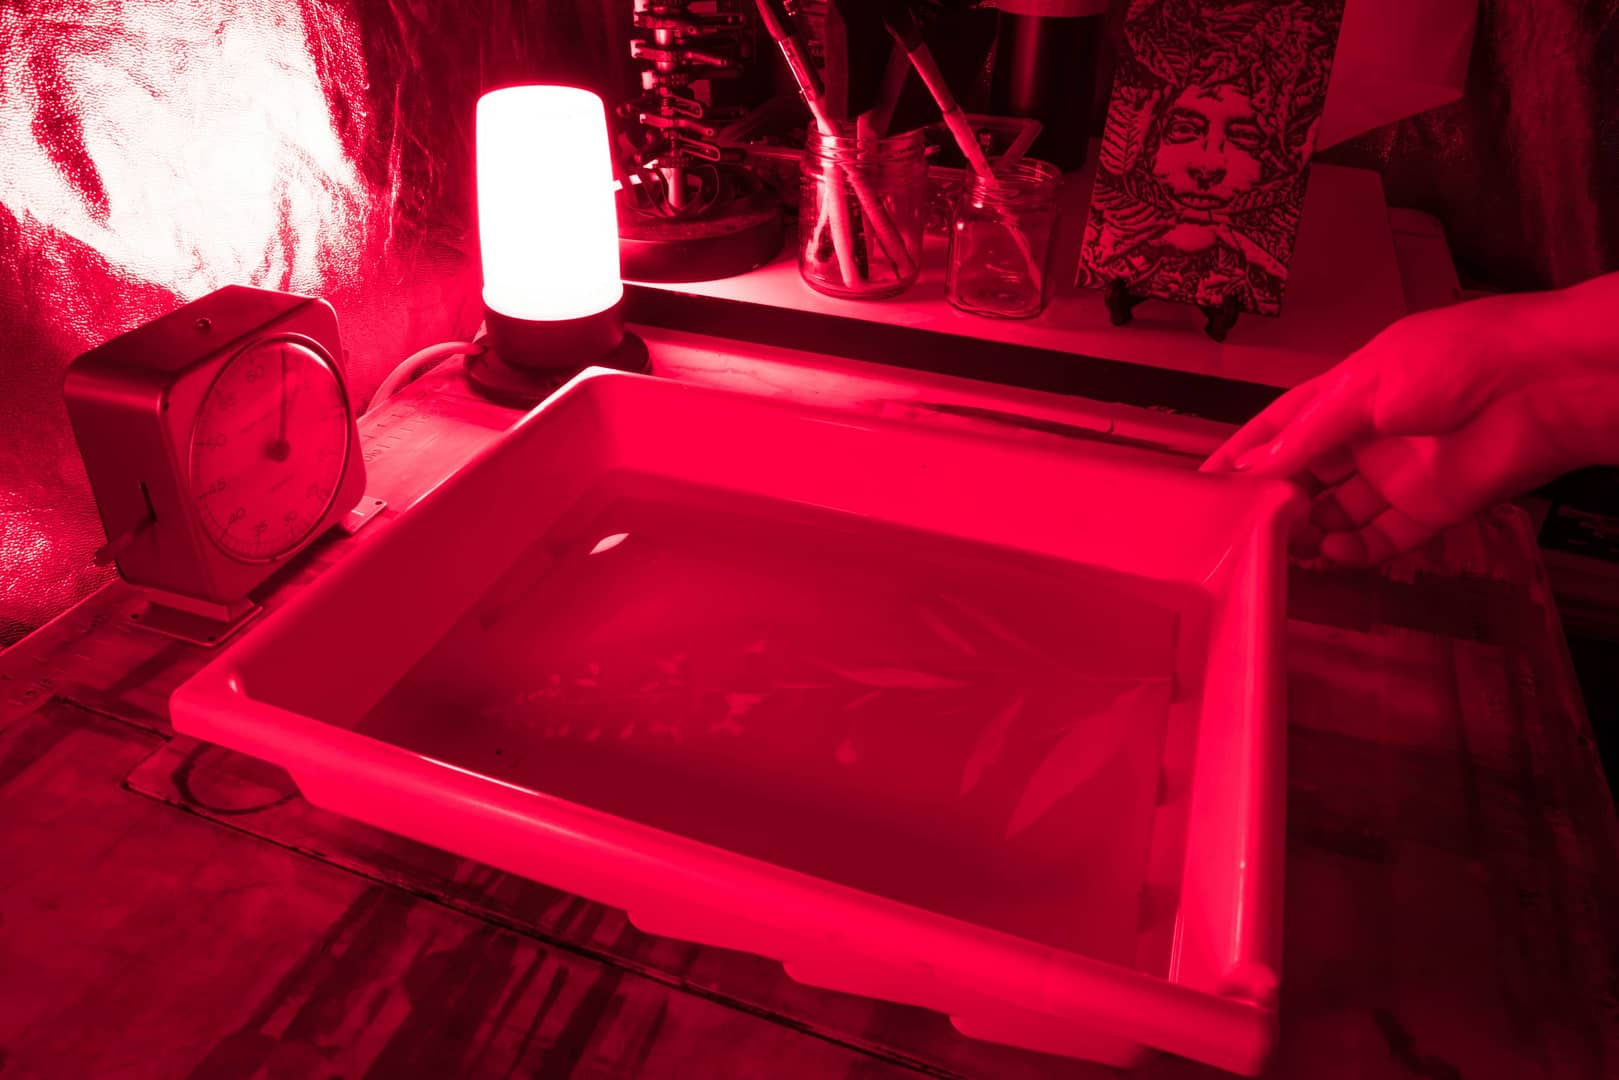 Botanical Photographic Art Print developing under a red light in a photographic darkroom